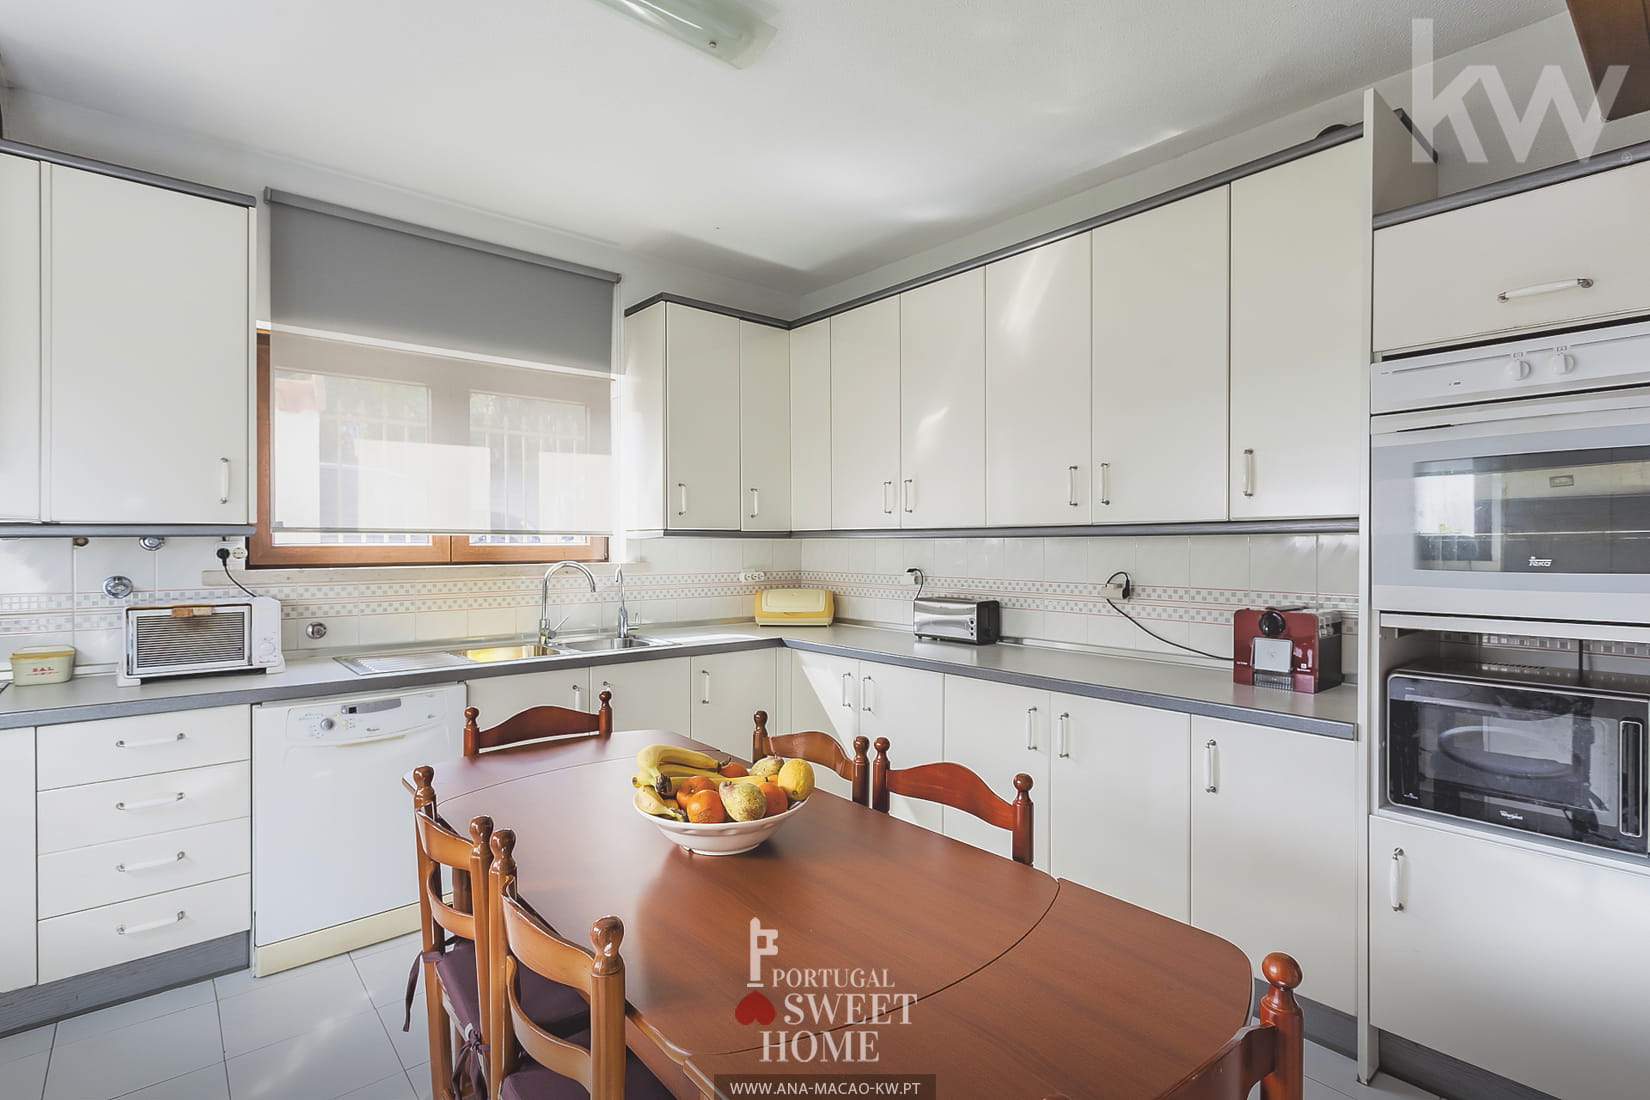 Large kitchen (17.6m2), partly equipped